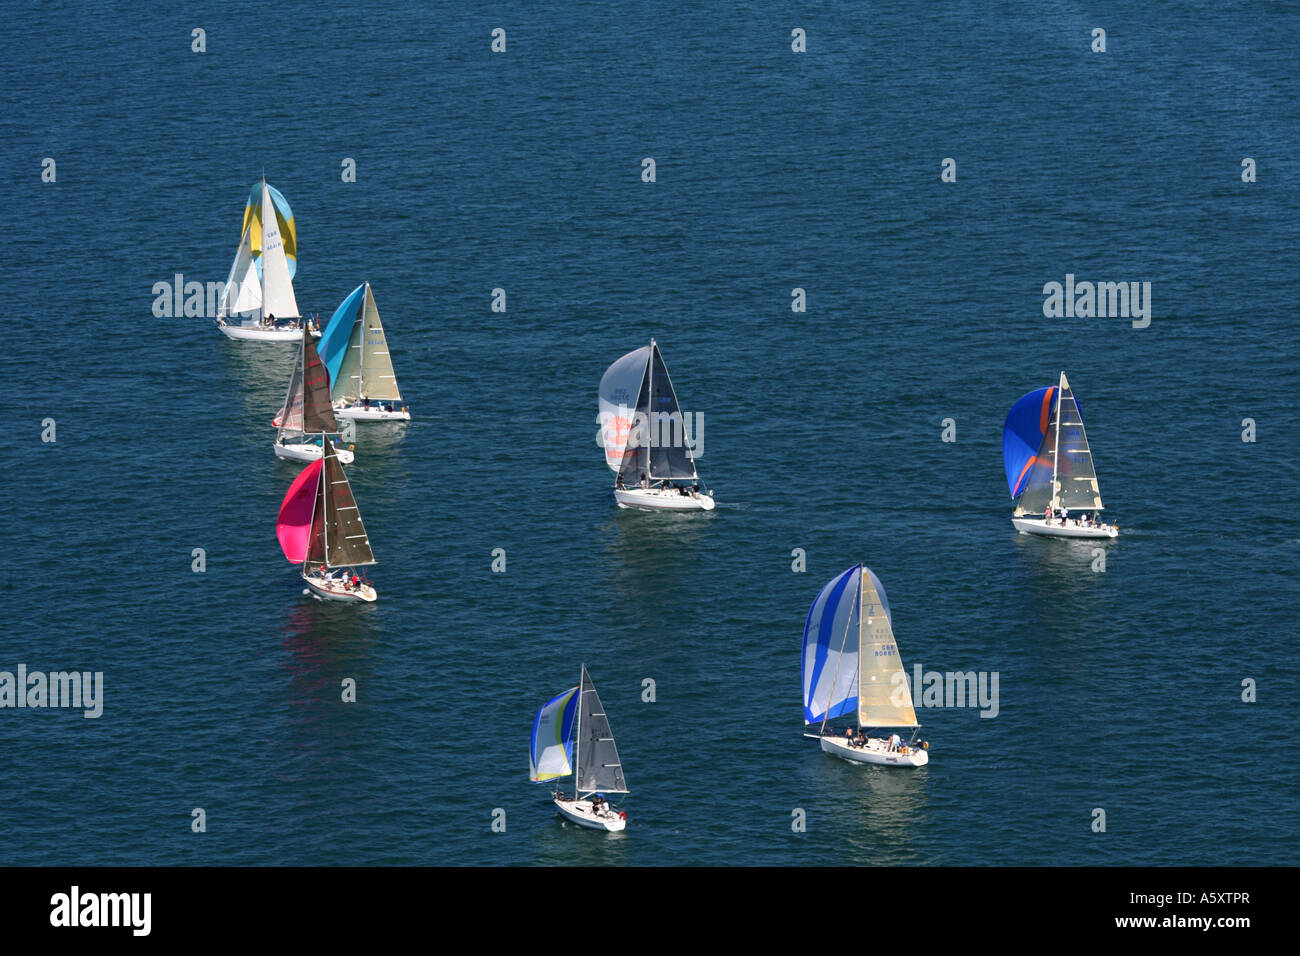 Racing yatchs from the air Stock Photo